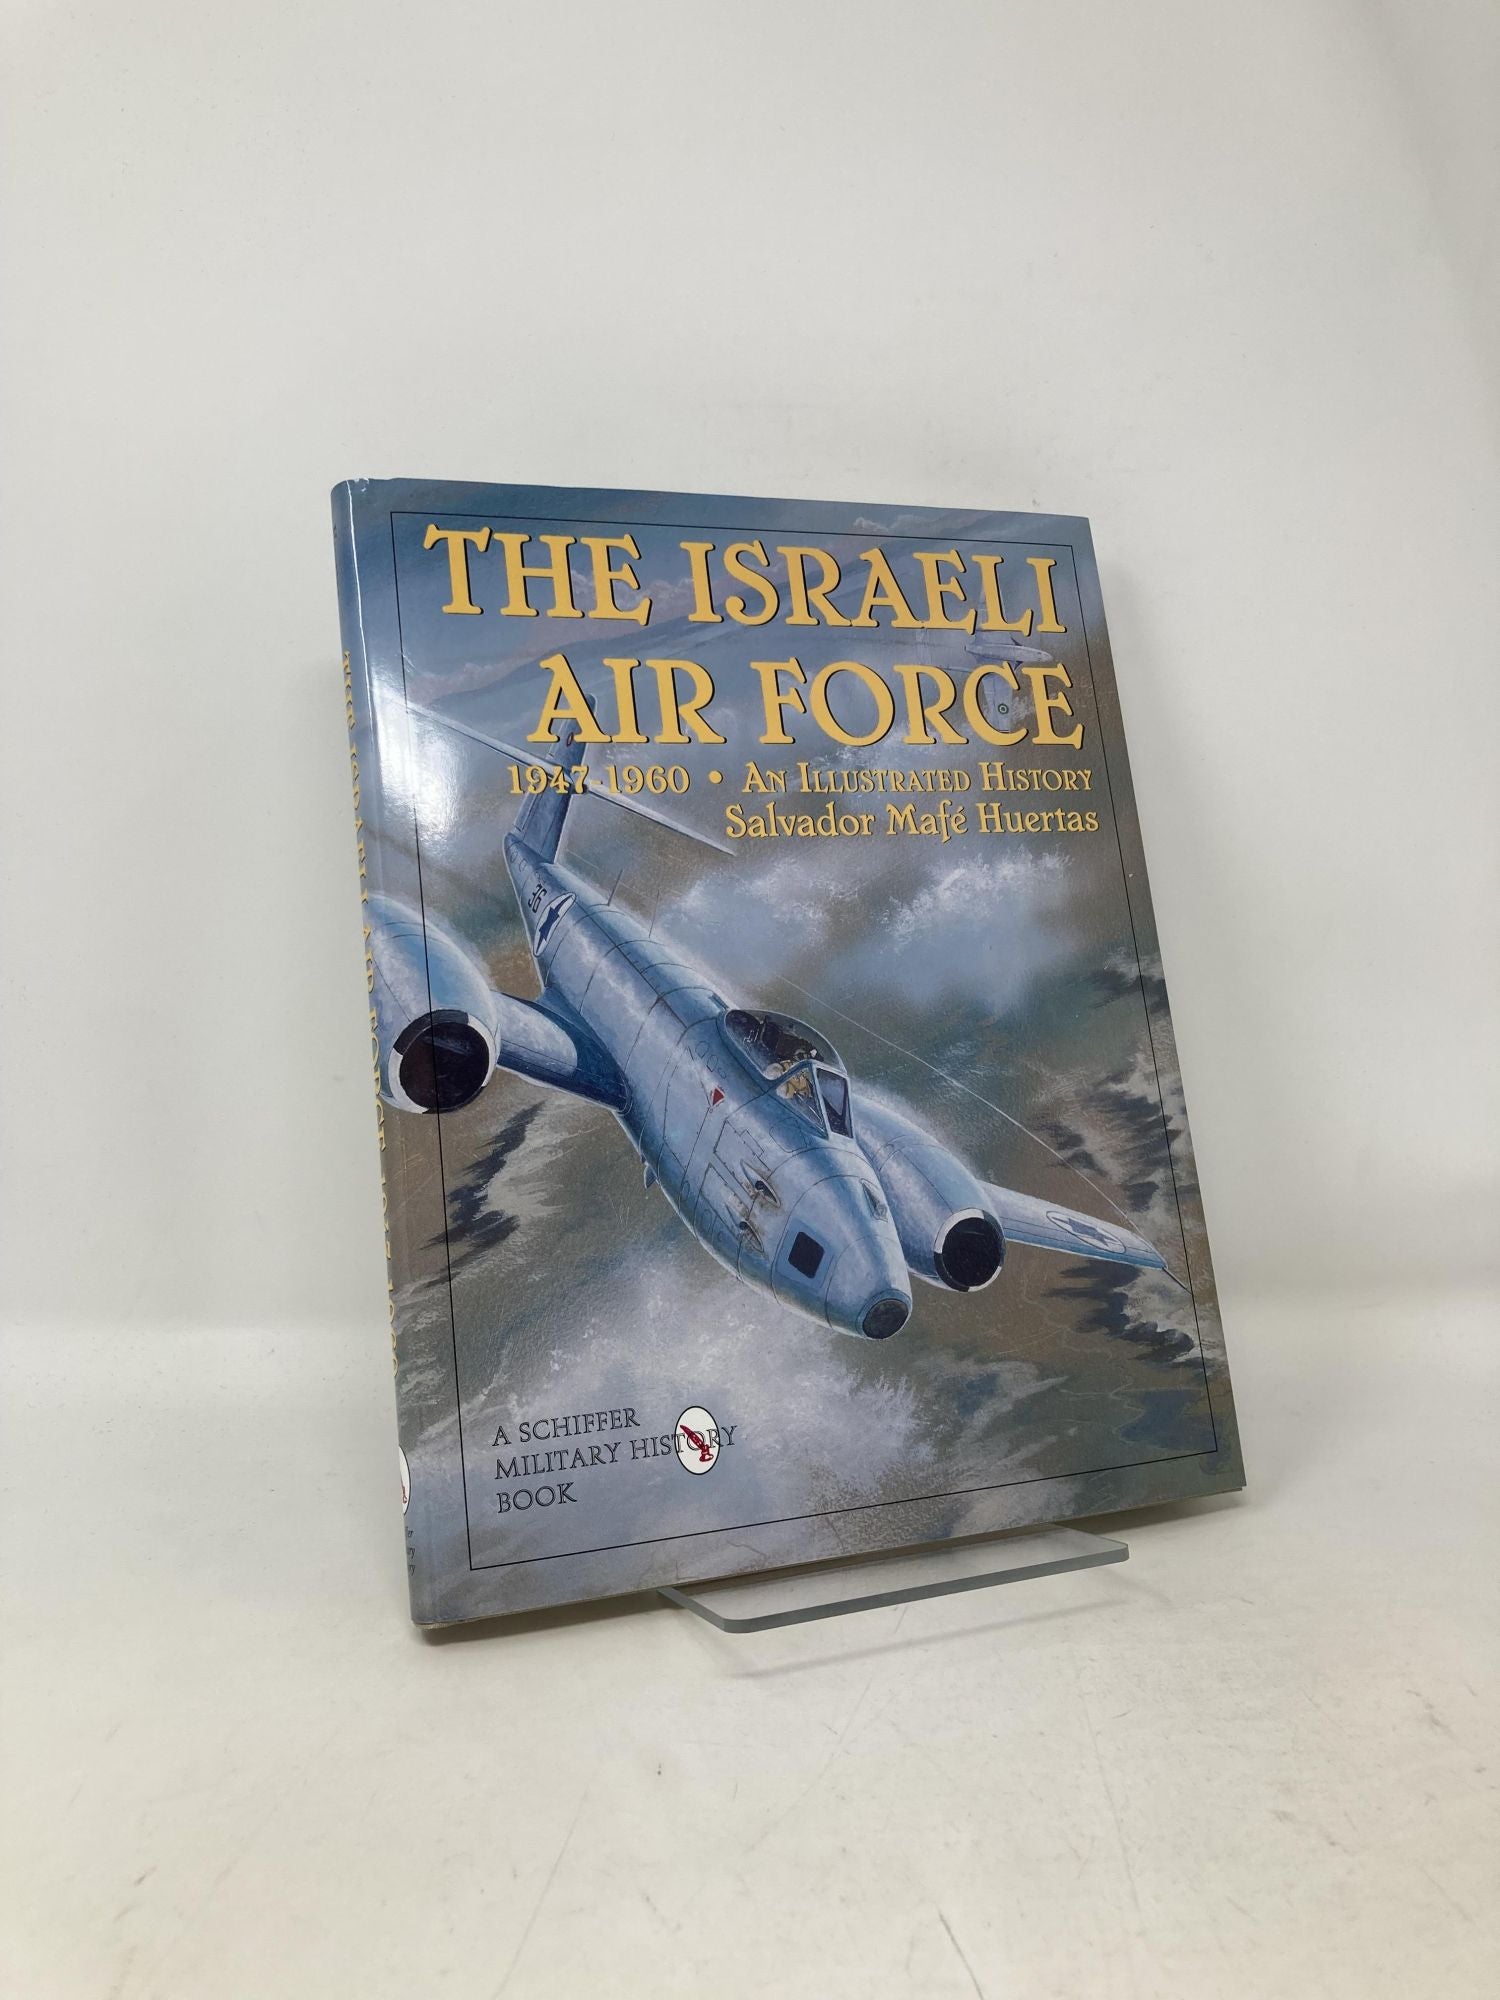 The Israeli Air Force 1947-1960: An Illustrated History Schiffer ...